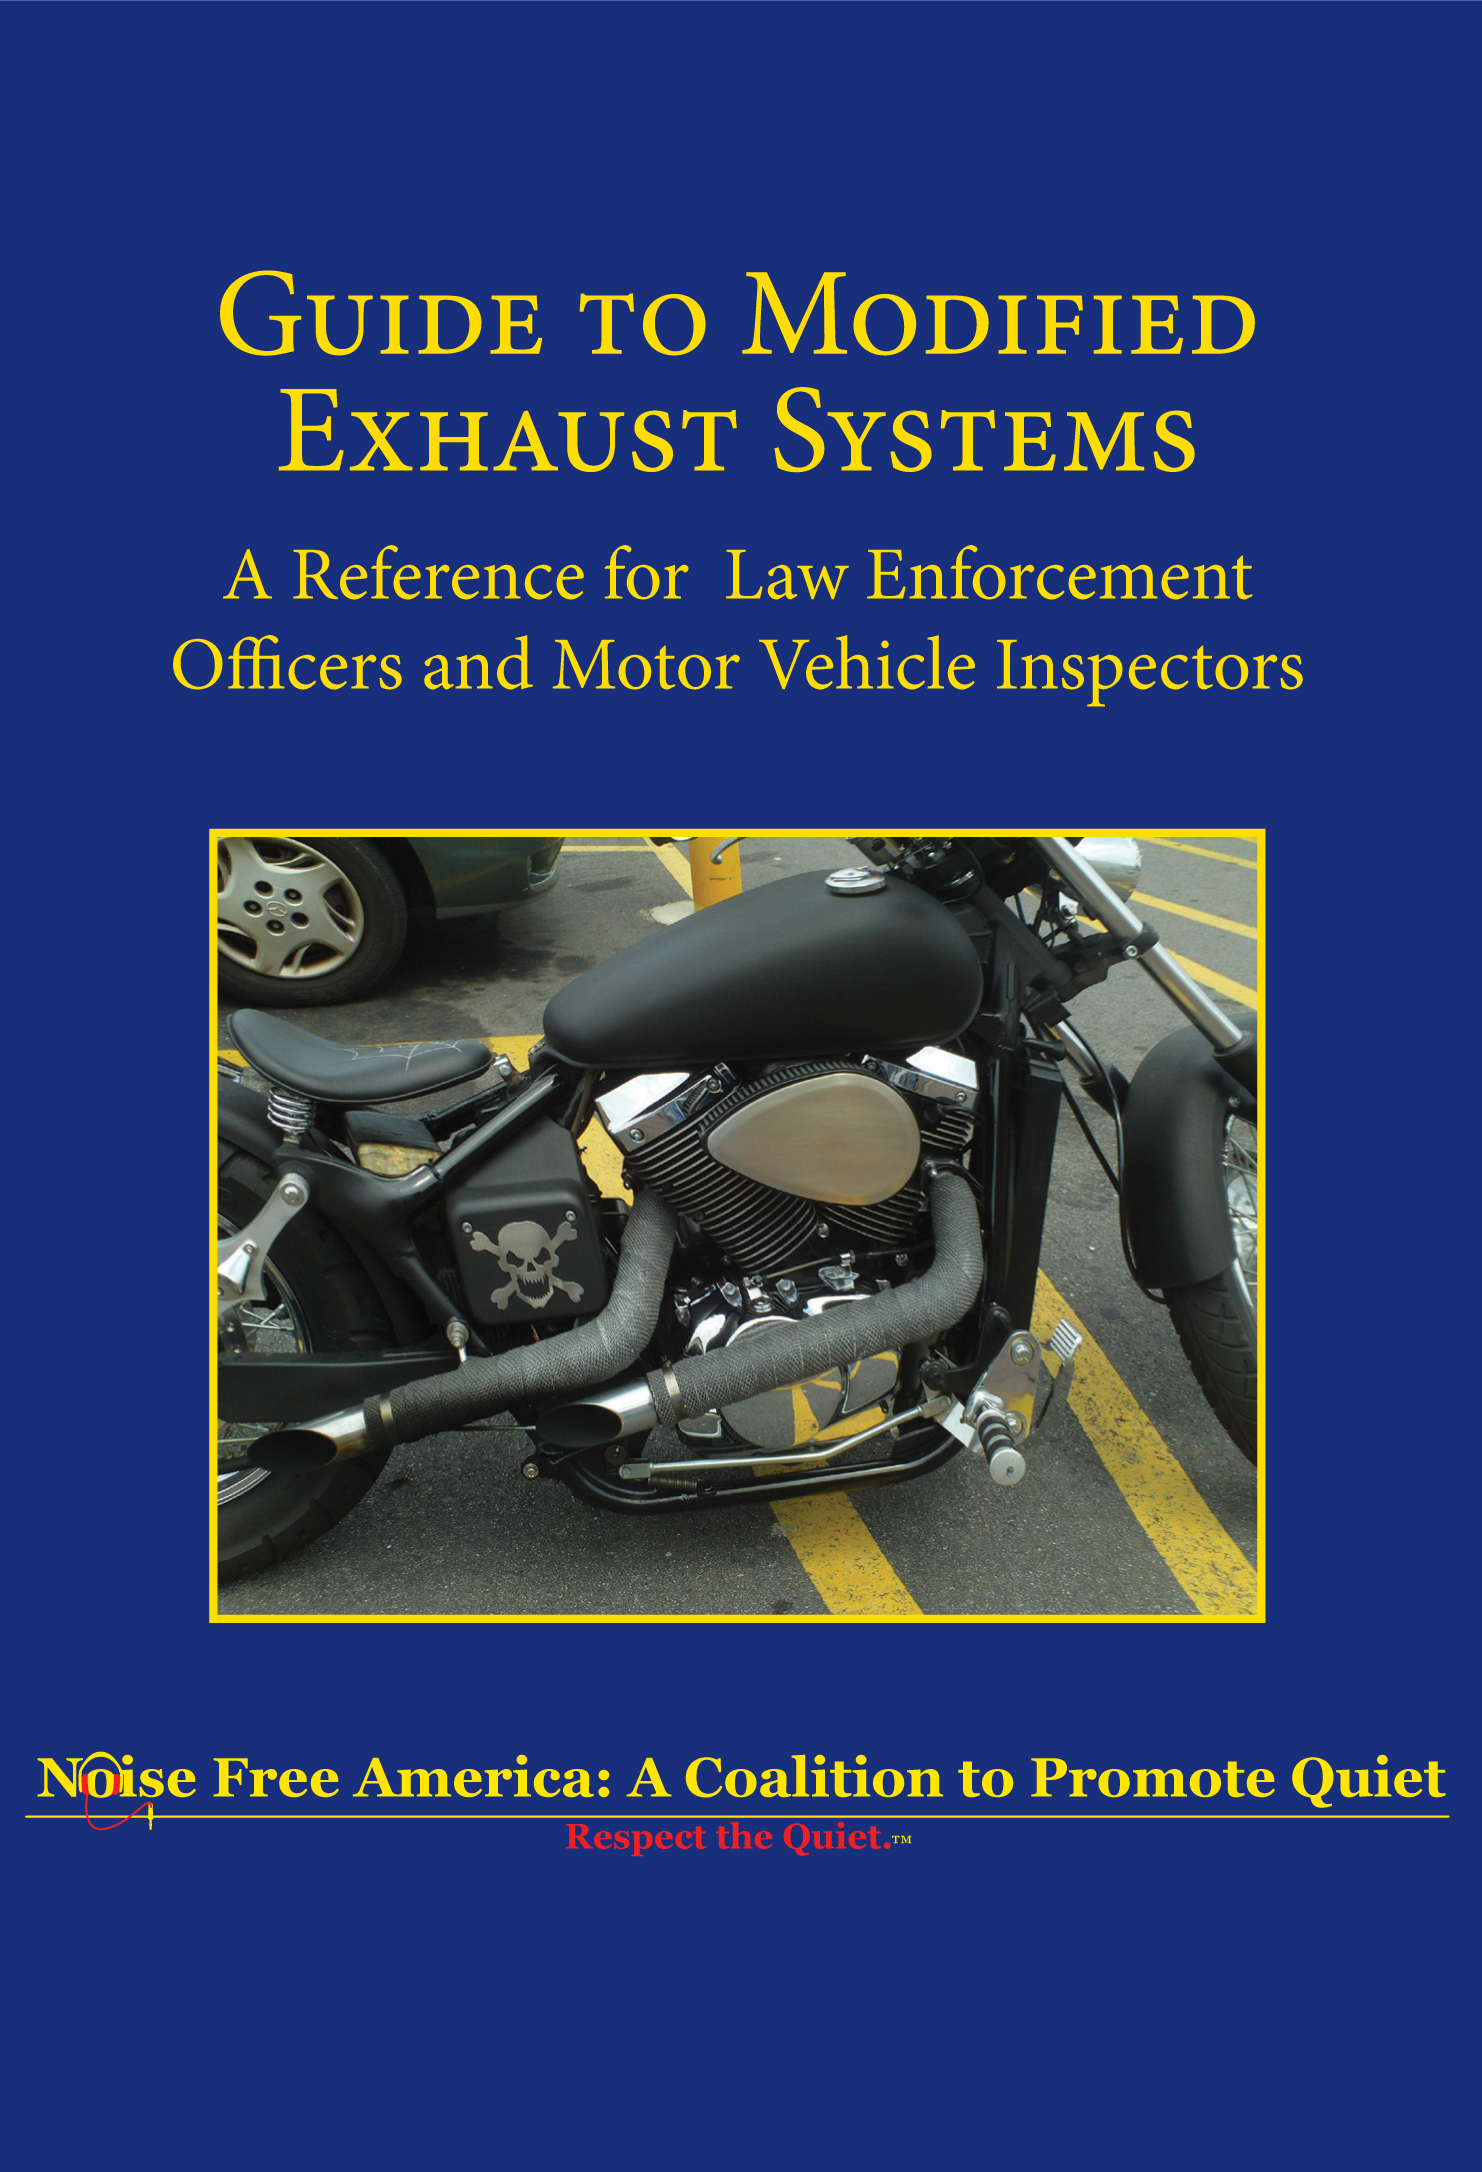 GUIDE TO MODIFIED EXHAUST SYSTEMS